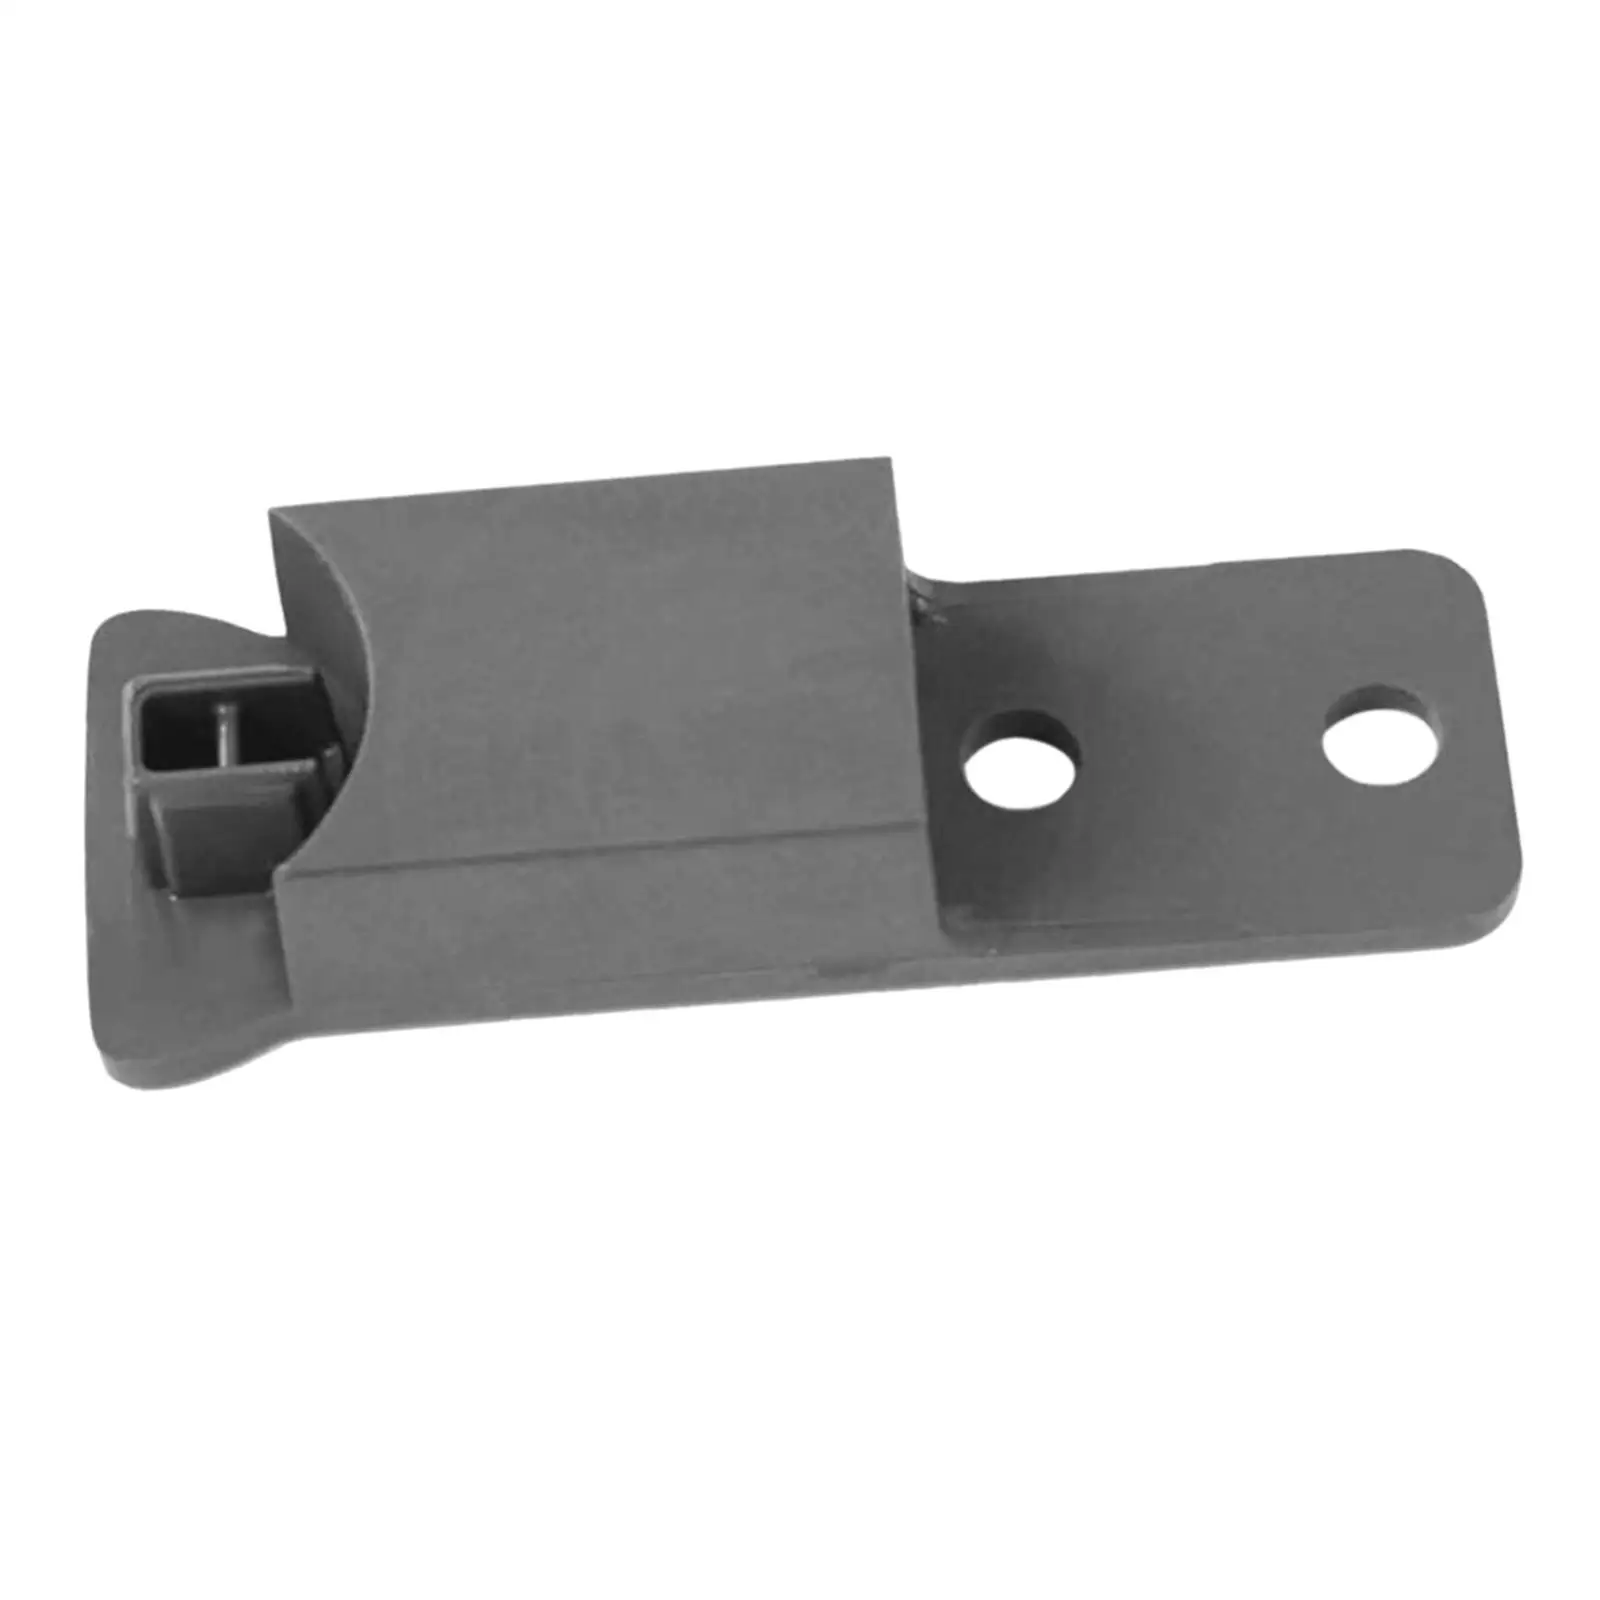 Handle End Cap Direct Replaces Accessories Appliance Cap W10838116 AP6036240 W10917049 for Whirlpool Refrigerator